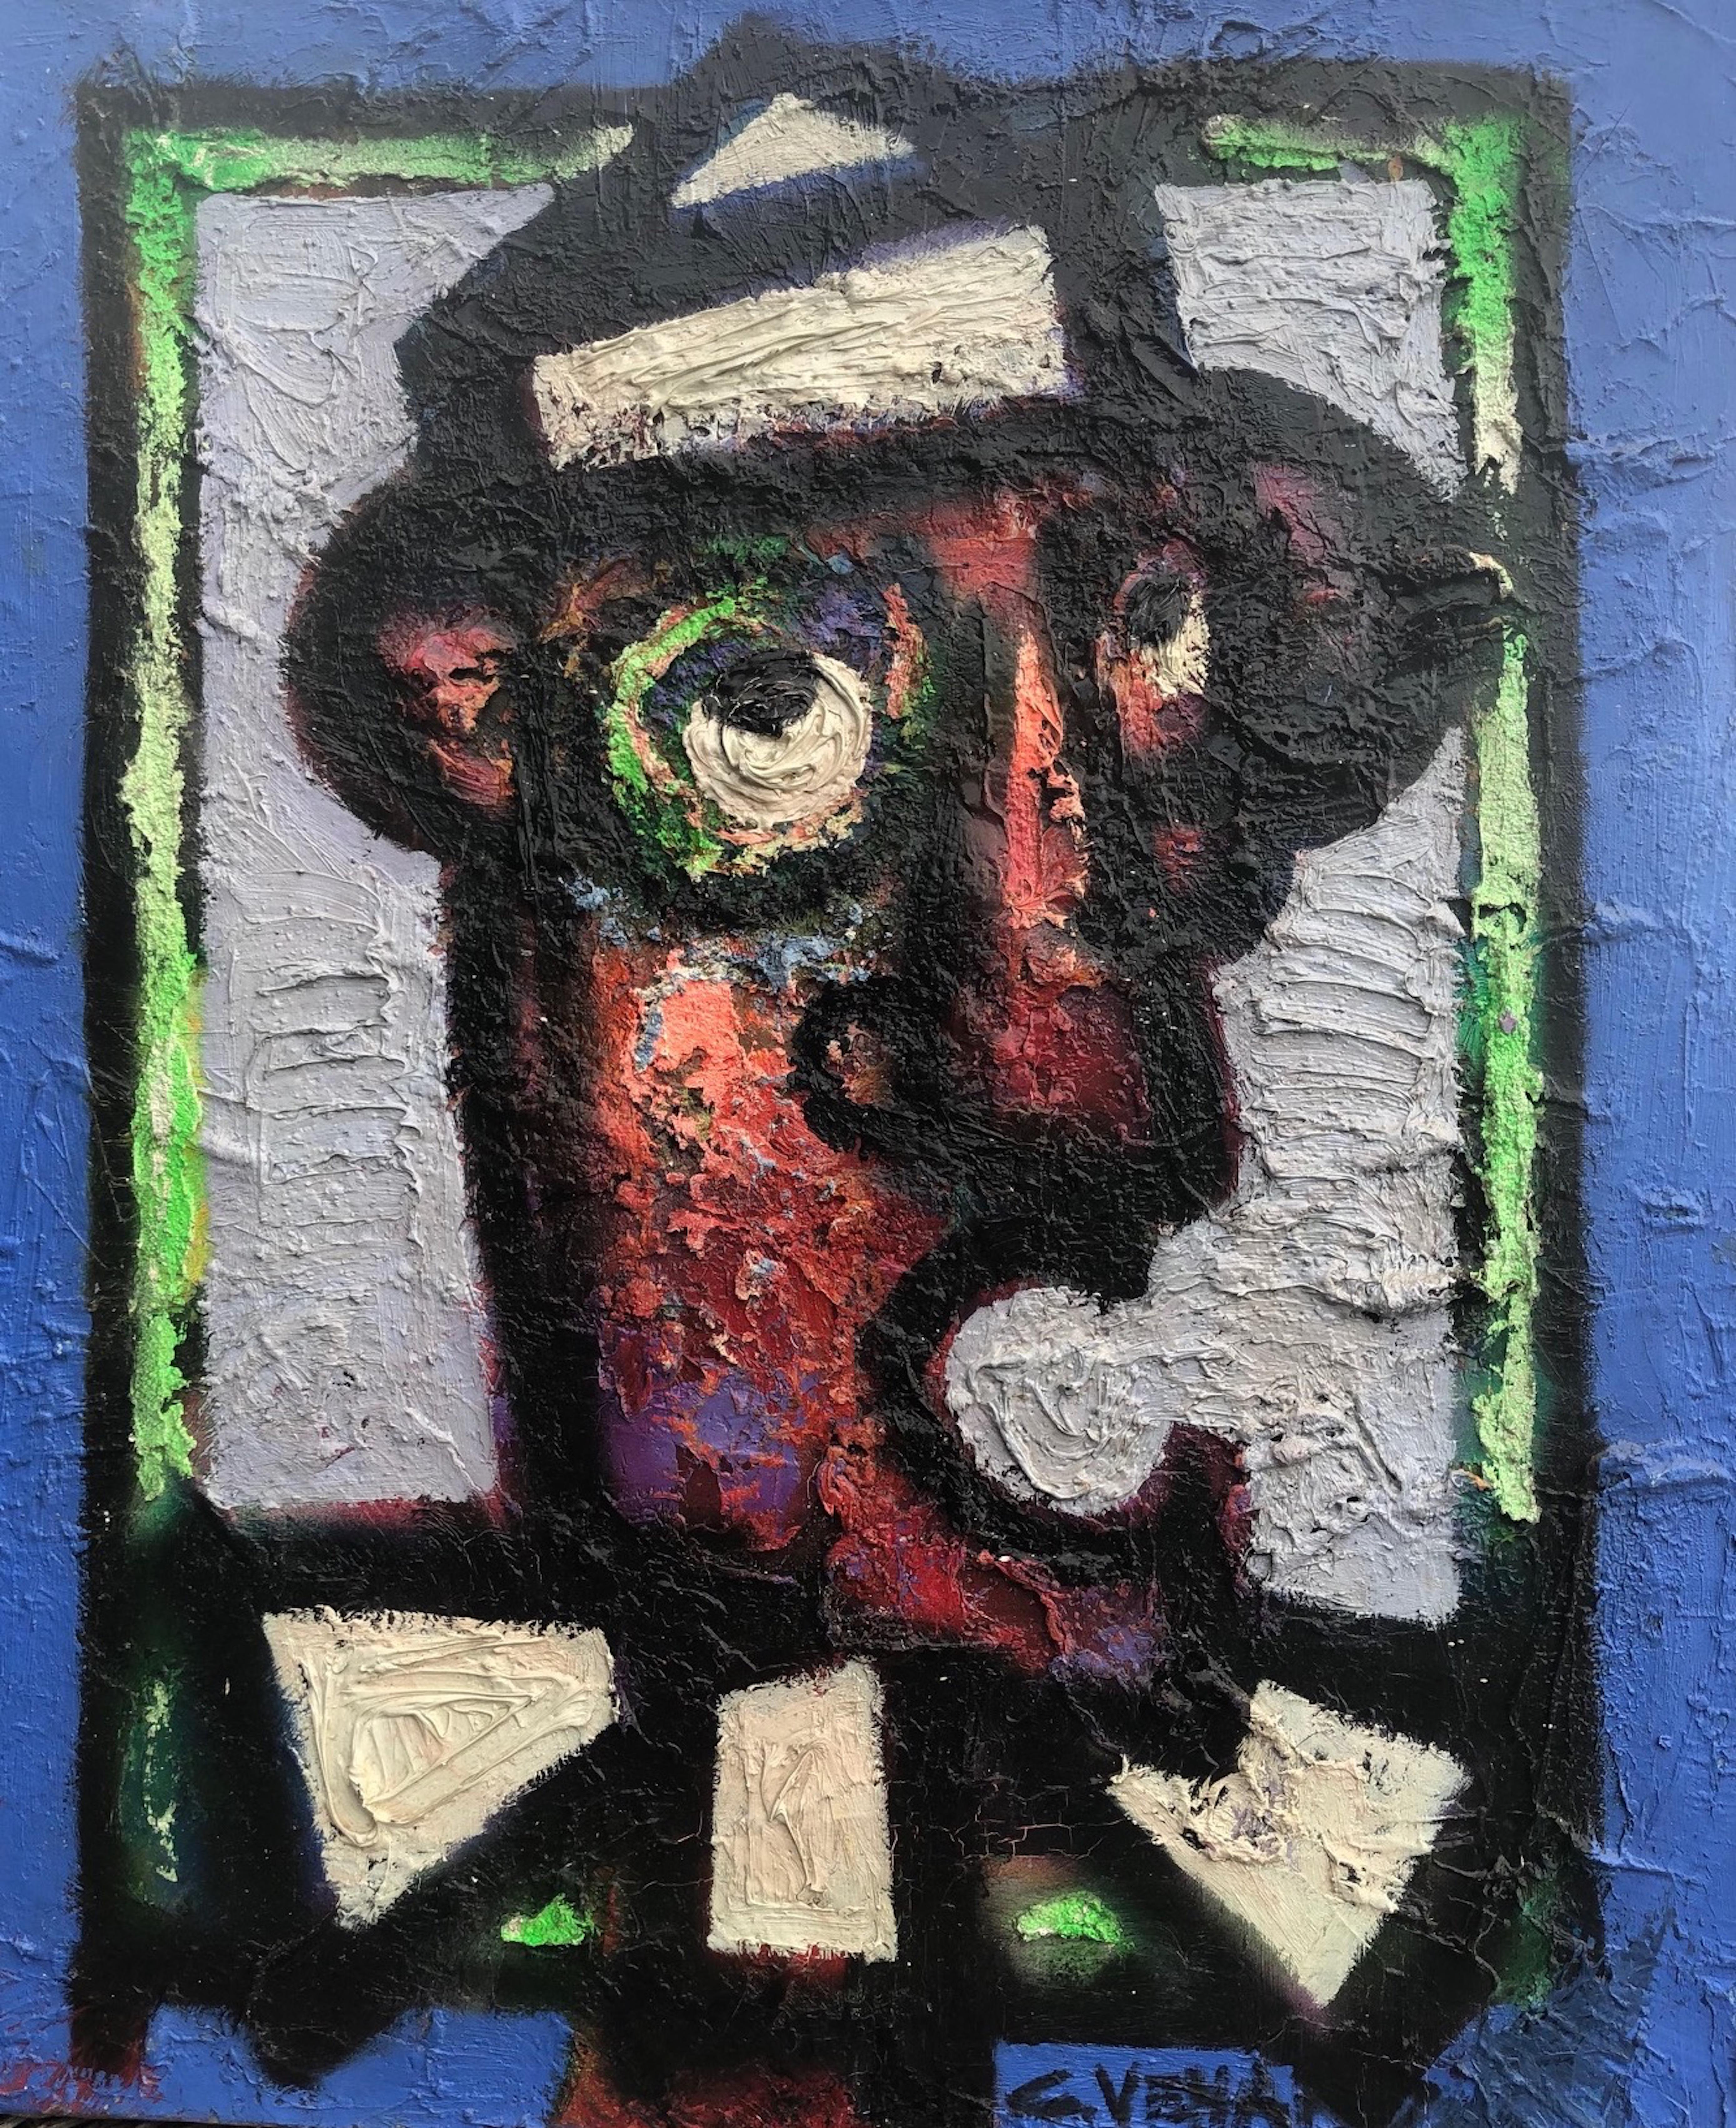 Post Cubist Abstract 20th Century Colourful Painting 'Le Clown' by Claude Venard 2